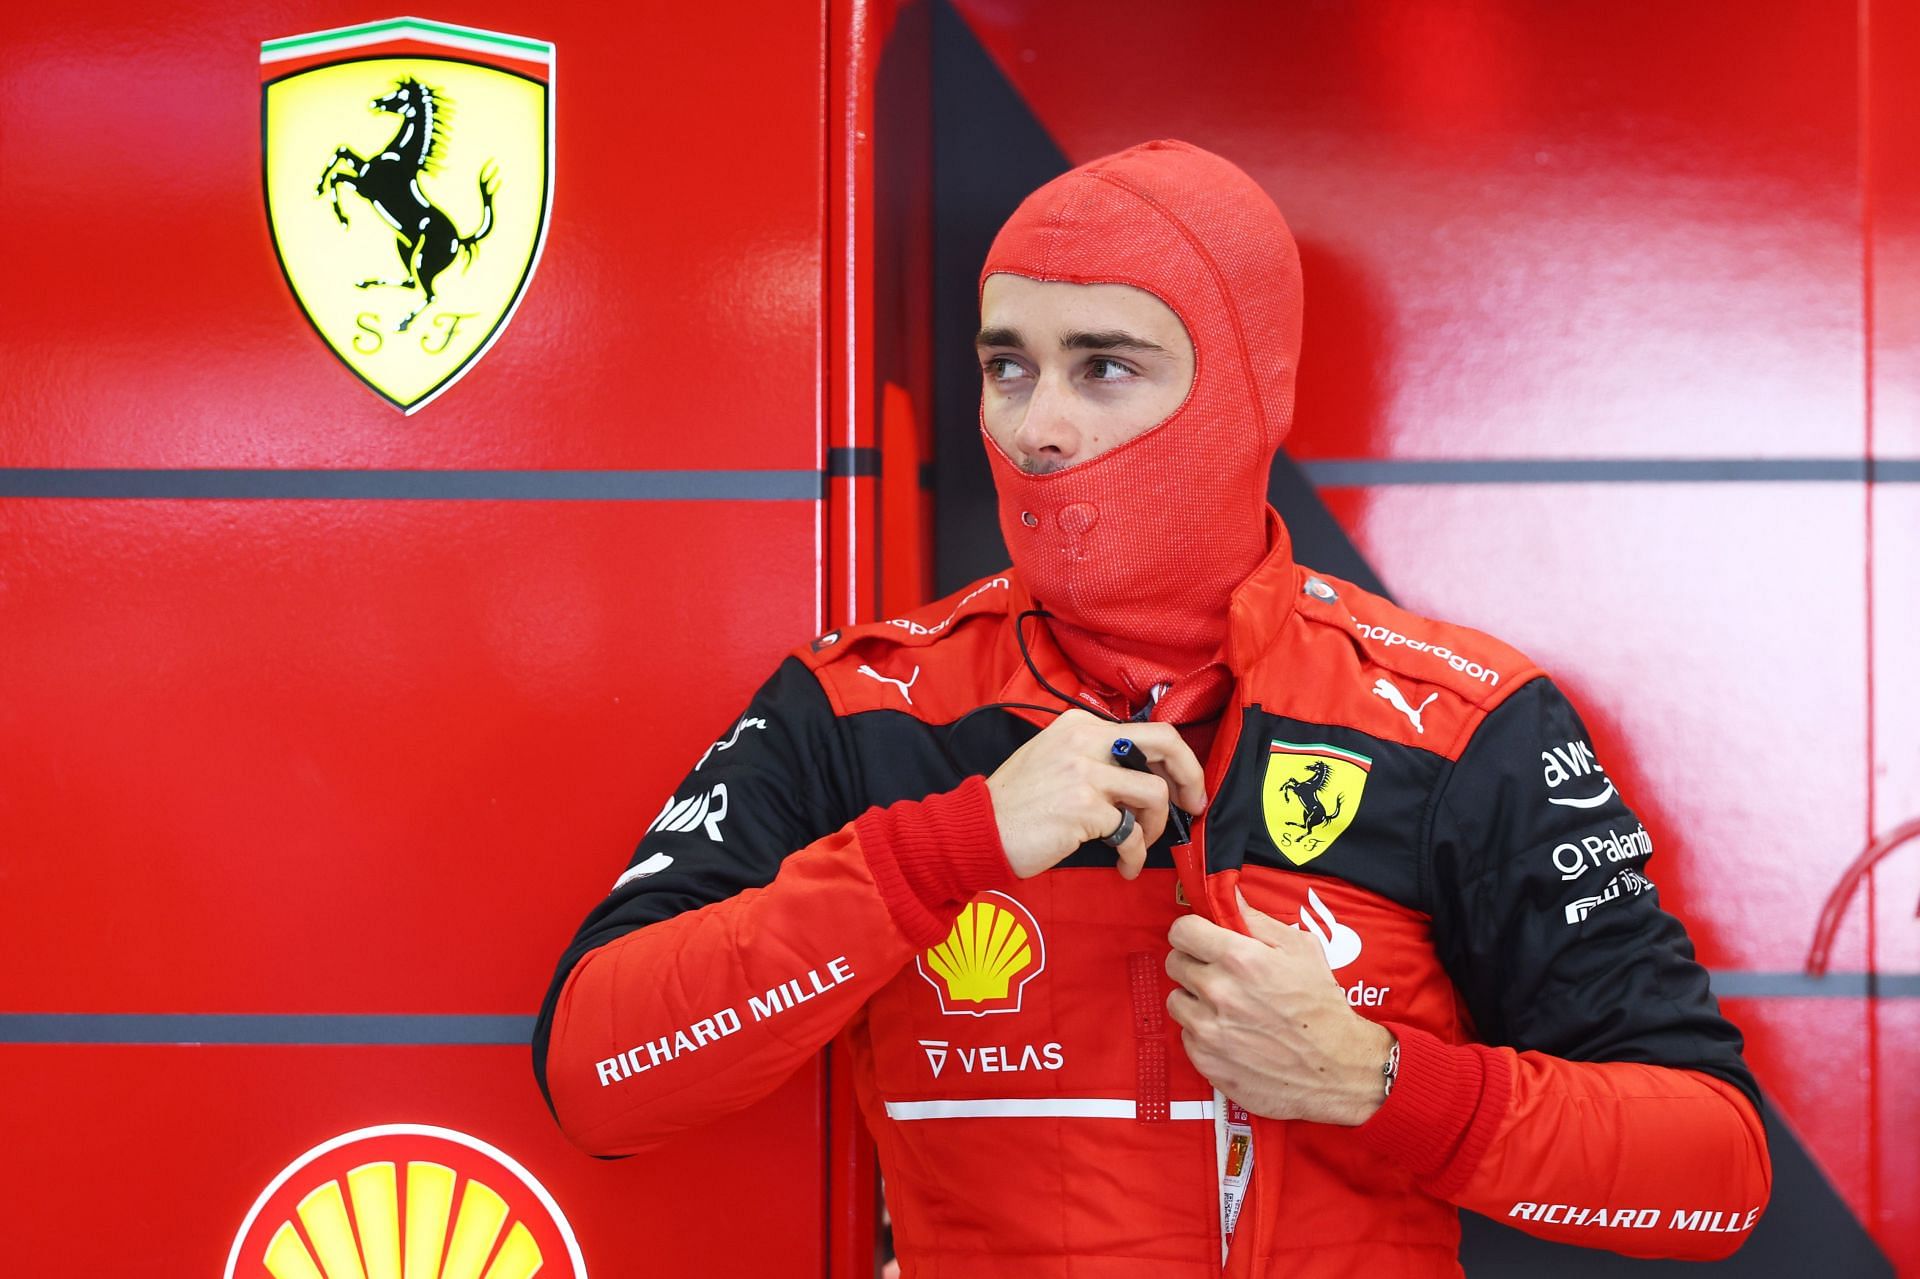 Charles Leclerc topped the standings in FP3